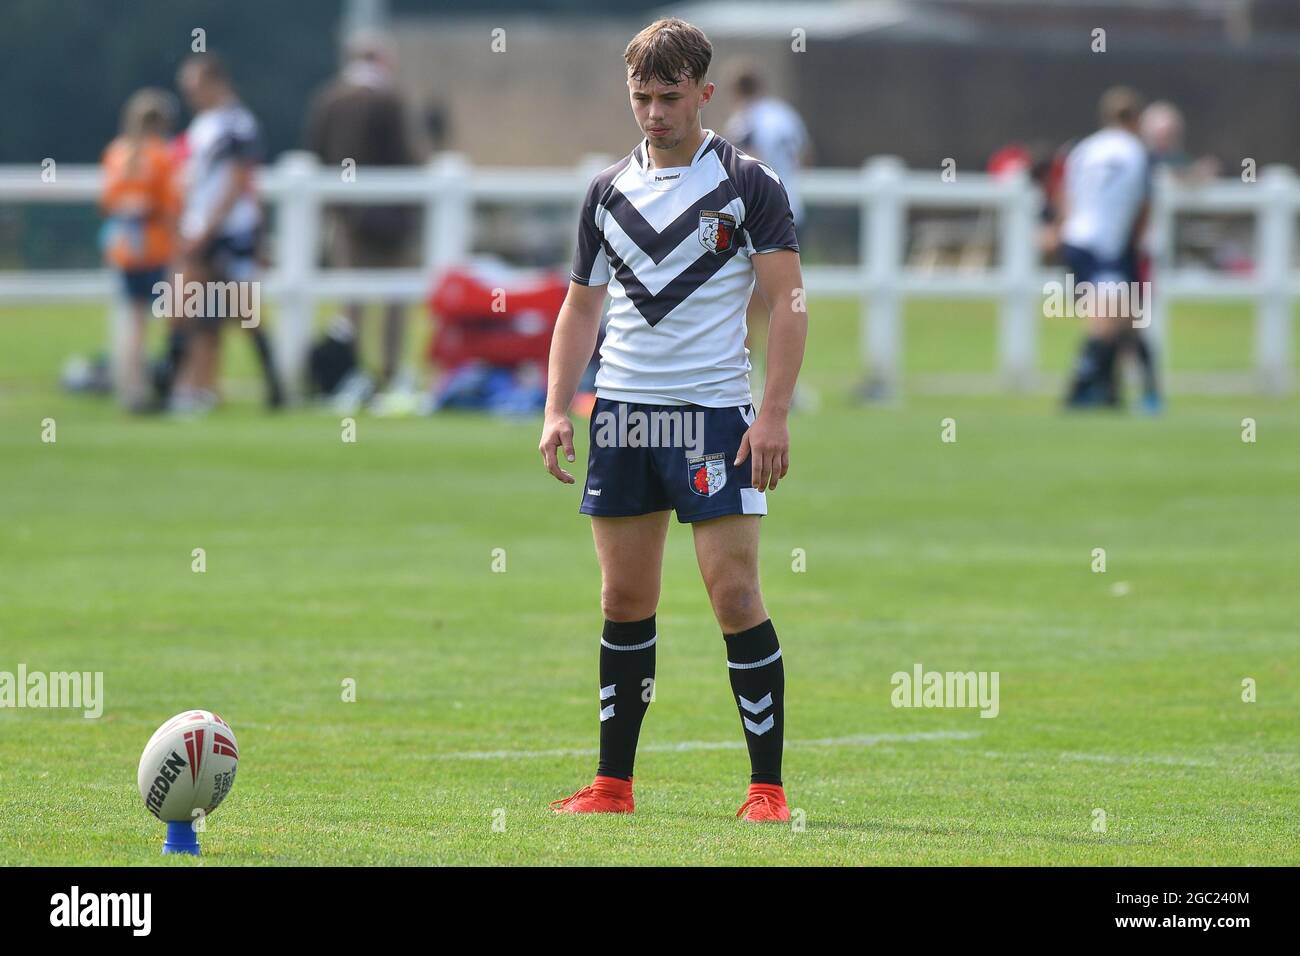 Leeds, England - 4 August 2021 - Lewis Camden (Bradford Bulls) of Yorkshire Academy during the Rugby League Roses Academy Match Yorkshire Academy vs Lancashire Academy at Weetwood Hall, Leeds, UK  Dean Williams Stock Photo